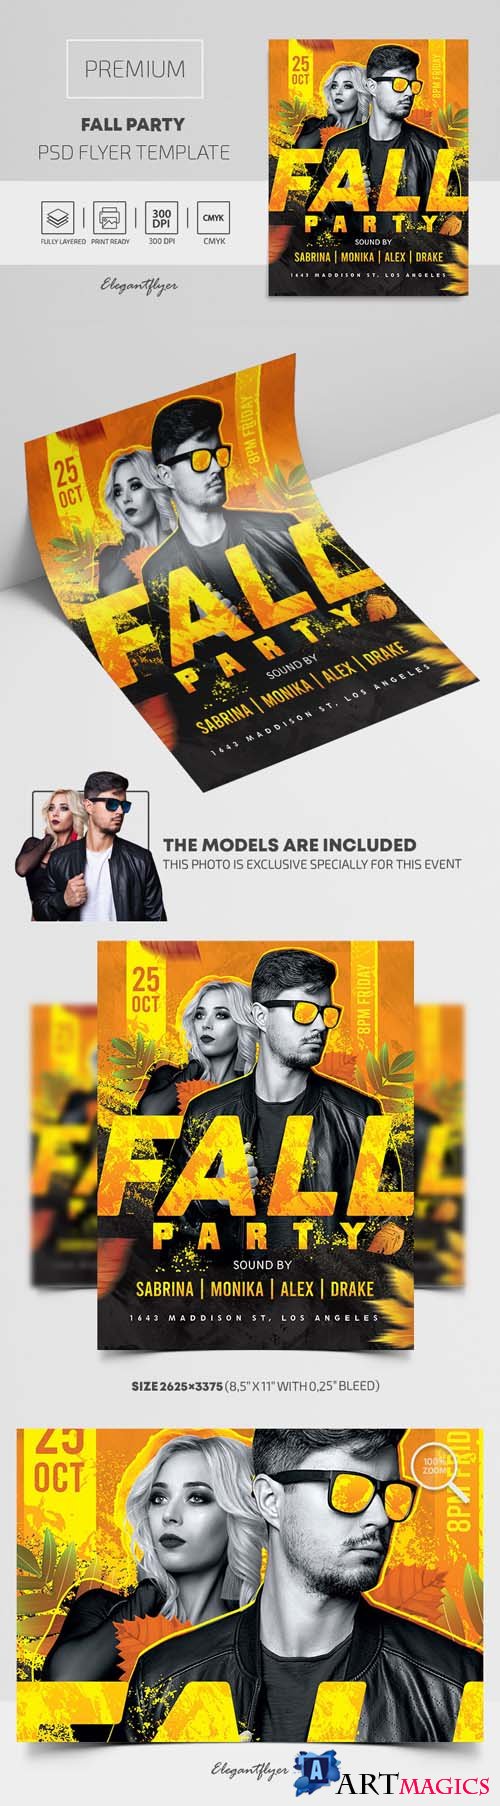 Fall Party Premium PSD Flyer Template